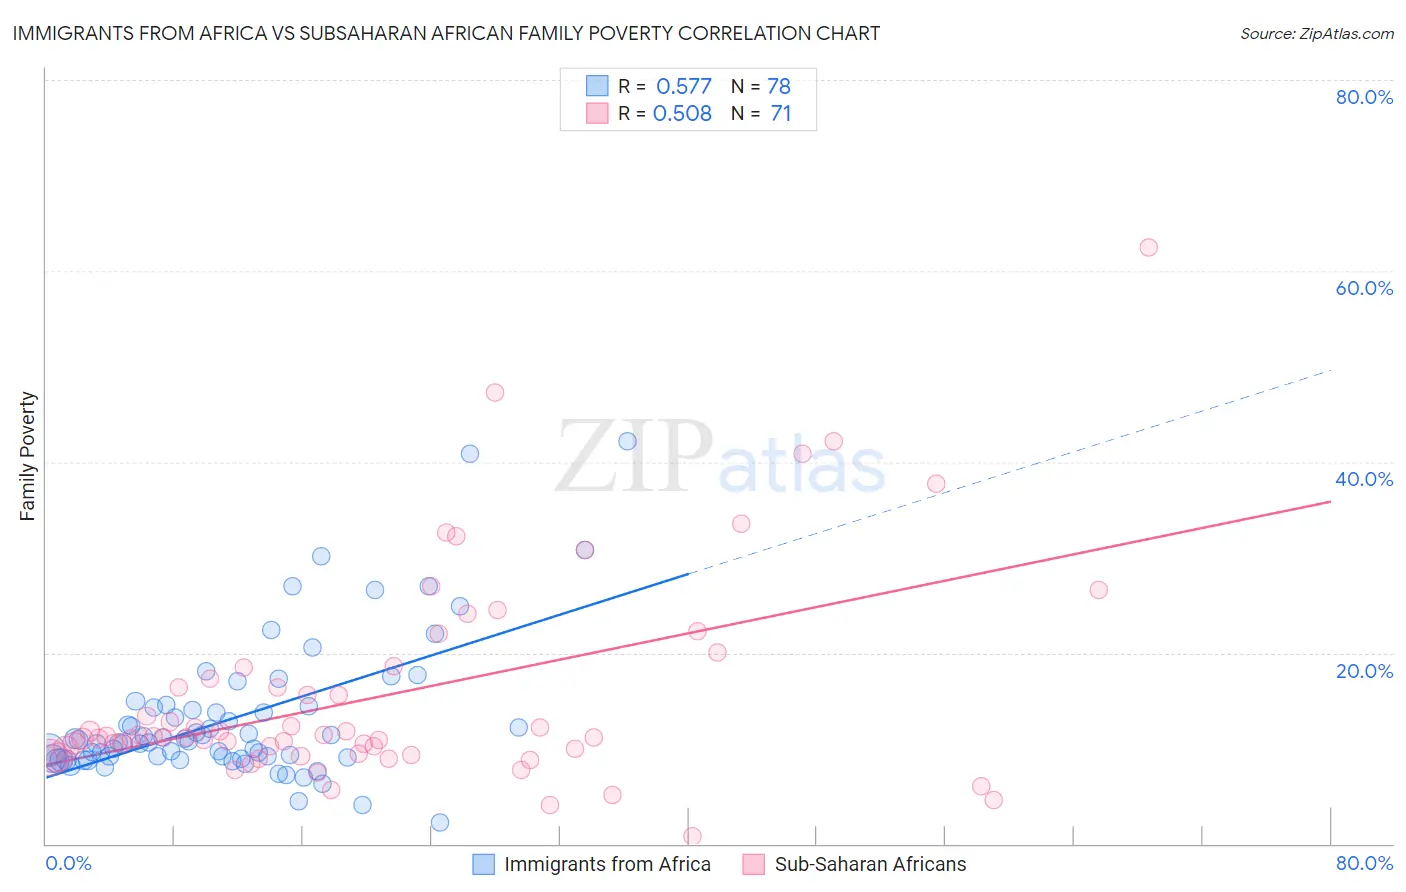 Immigrants from Africa vs Subsaharan African Family Poverty